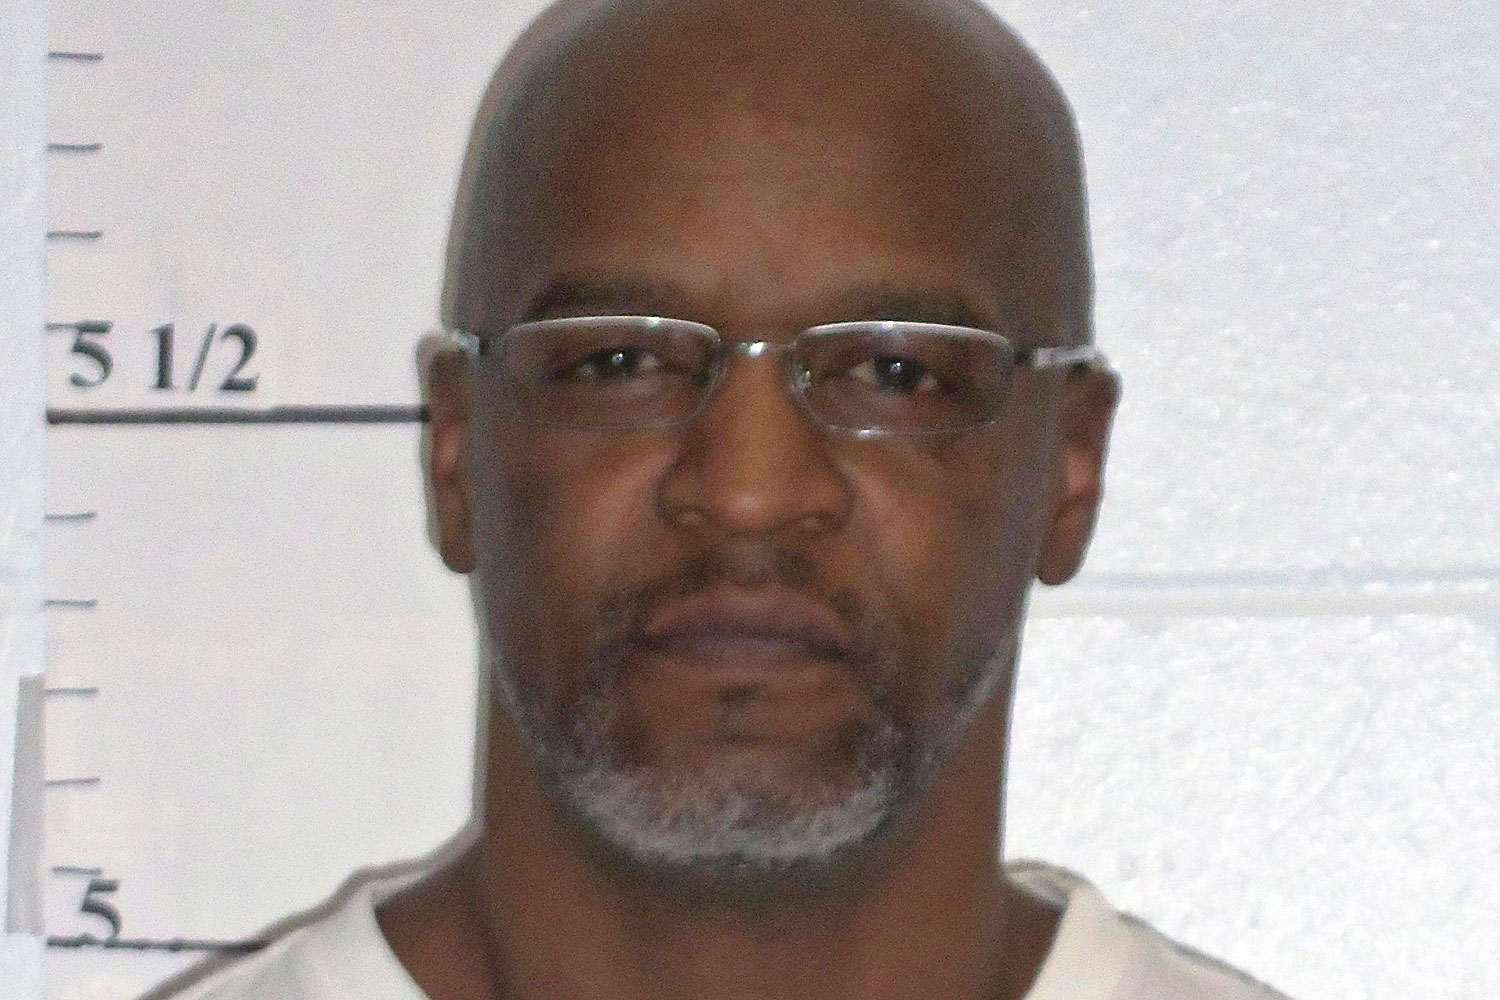 Convicted killer Michael Taylor is shown in this Missouri Department of Corrections photo released on Feb. 25, 2014. (Missouri Department of Corrections/Reuters)